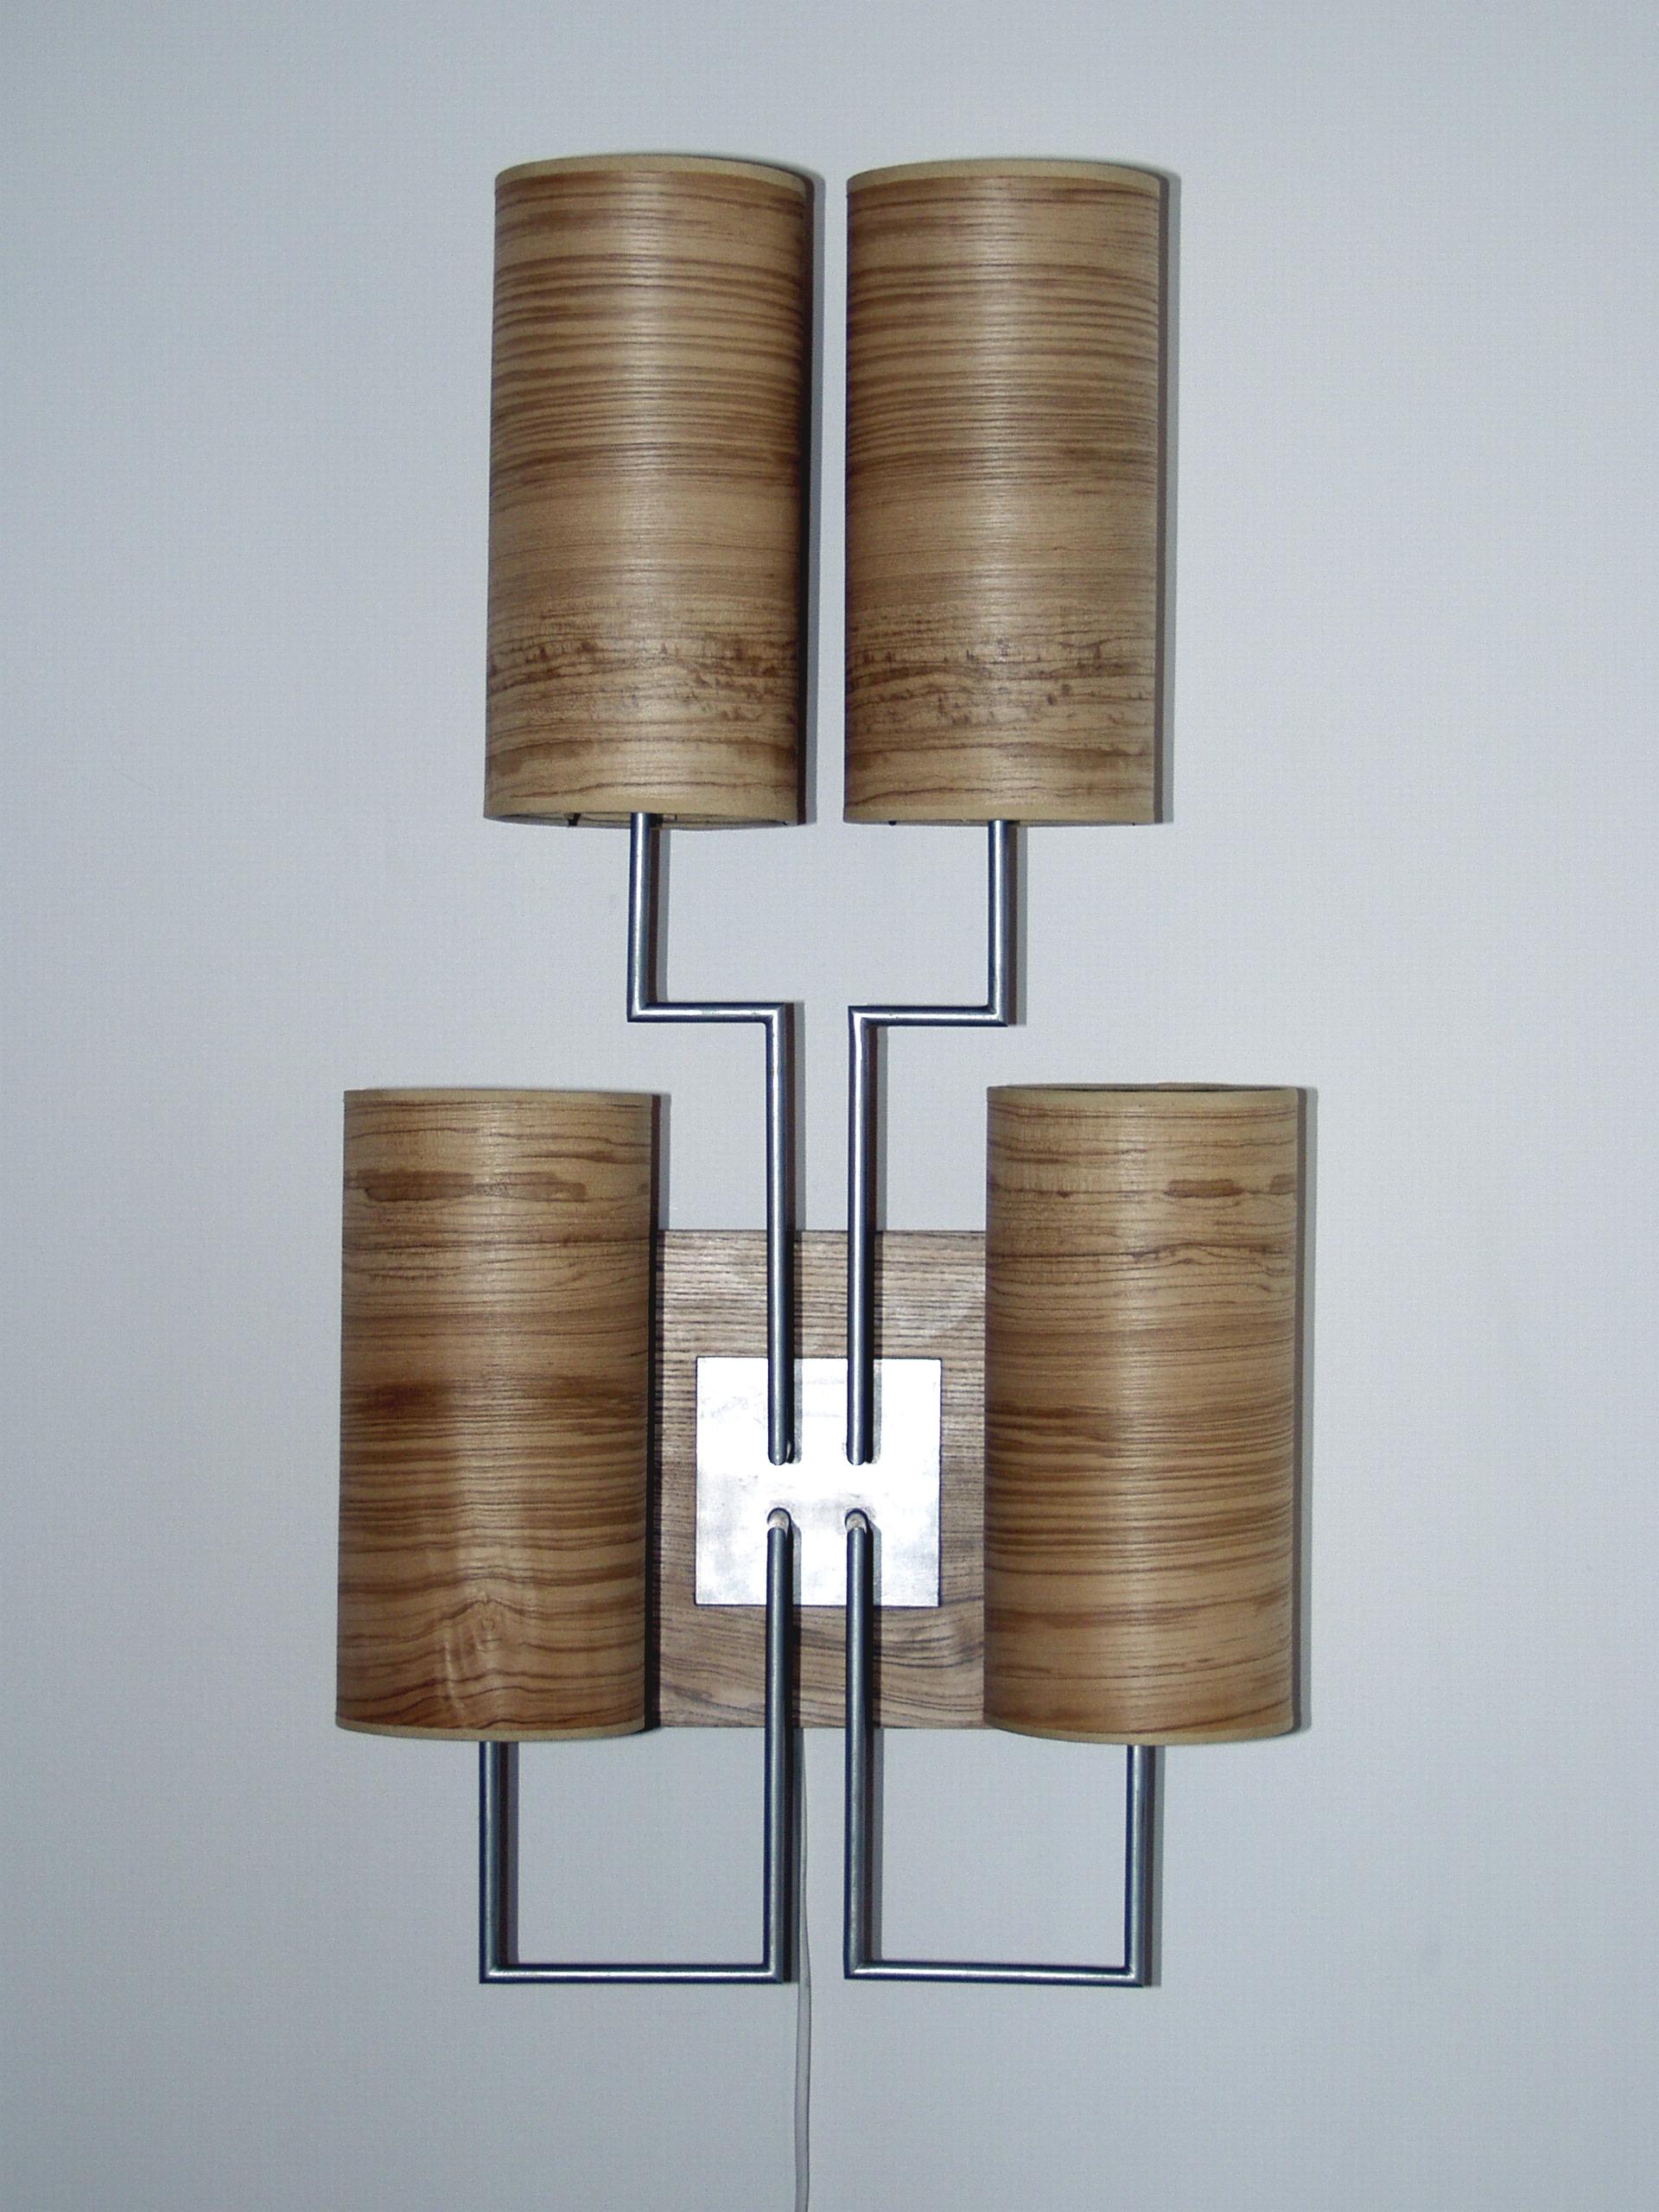 French Wall Lamp Sconce “Tige4” Gold Bronze Patina, Wooden Lampshades by Aymeric Lefort For Sale